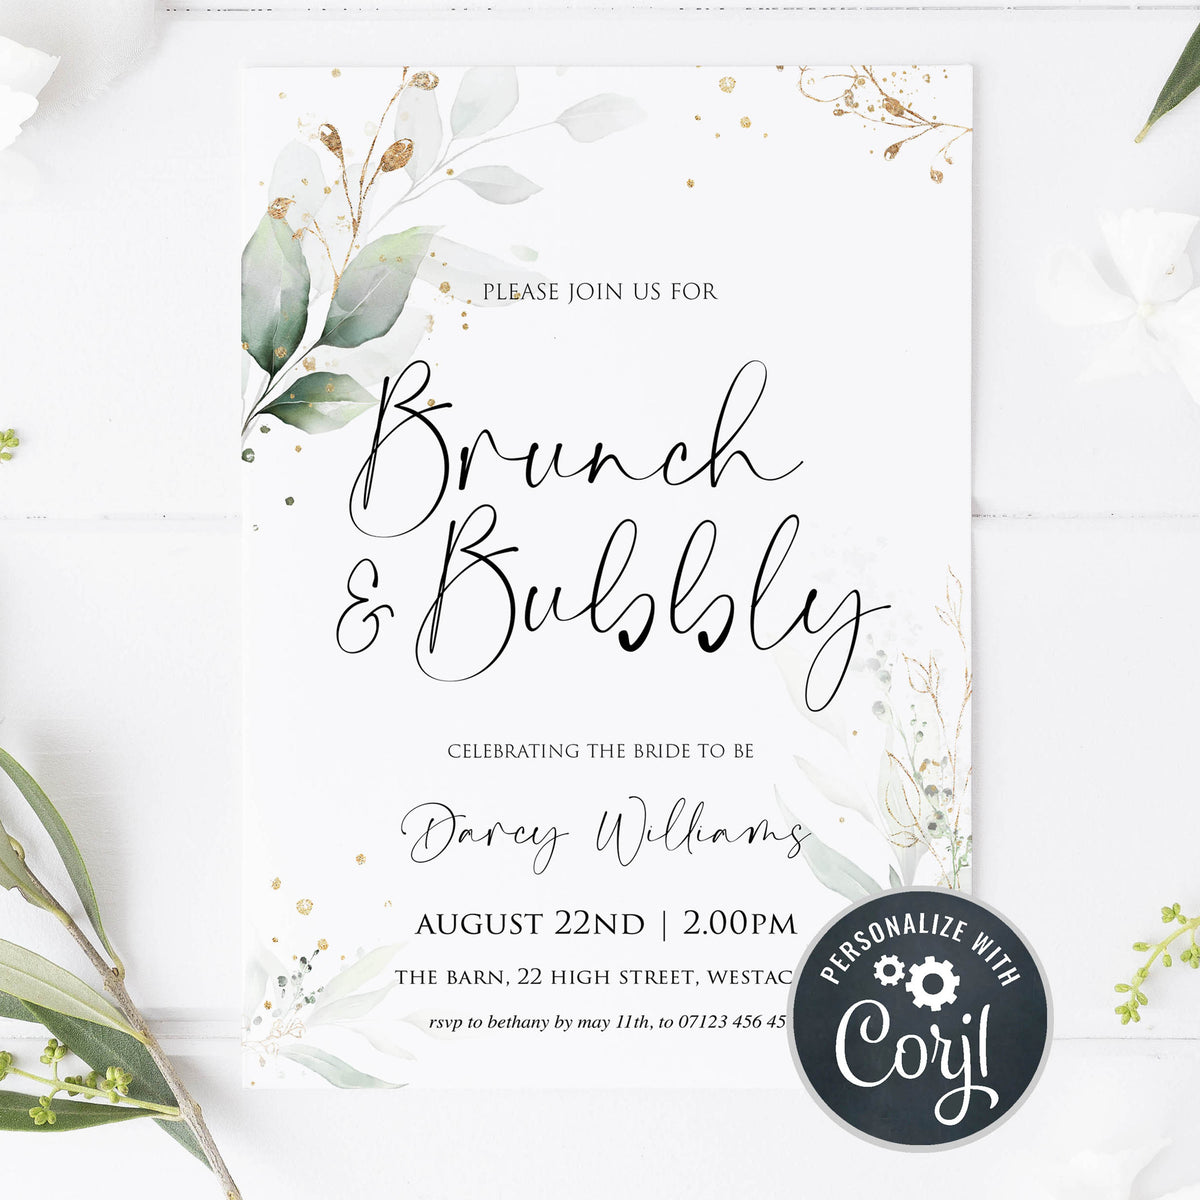 brunch and bubbly invitations, editable bridal shower invitations, printable bridal shower invites, floral bachelorette invites, hen party invitations, gold floral bridal invitations